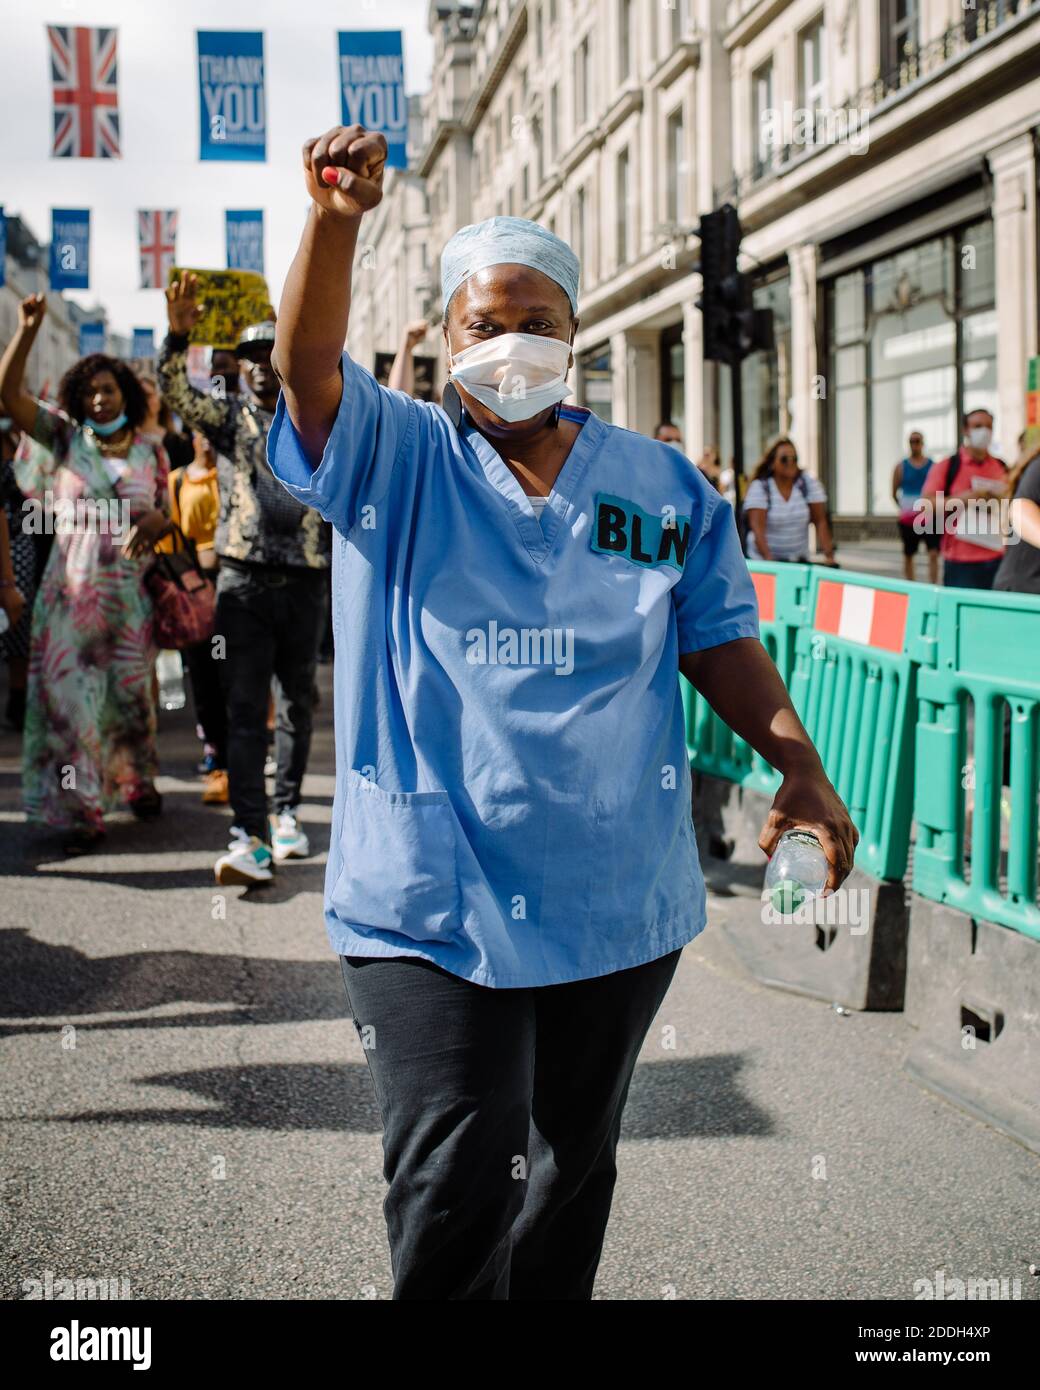 London, United Kingdom - July 18, 2020: All Black Lives UK march from Marble Arch to Parliament Square in support to Black Lives Matter Stock Photo